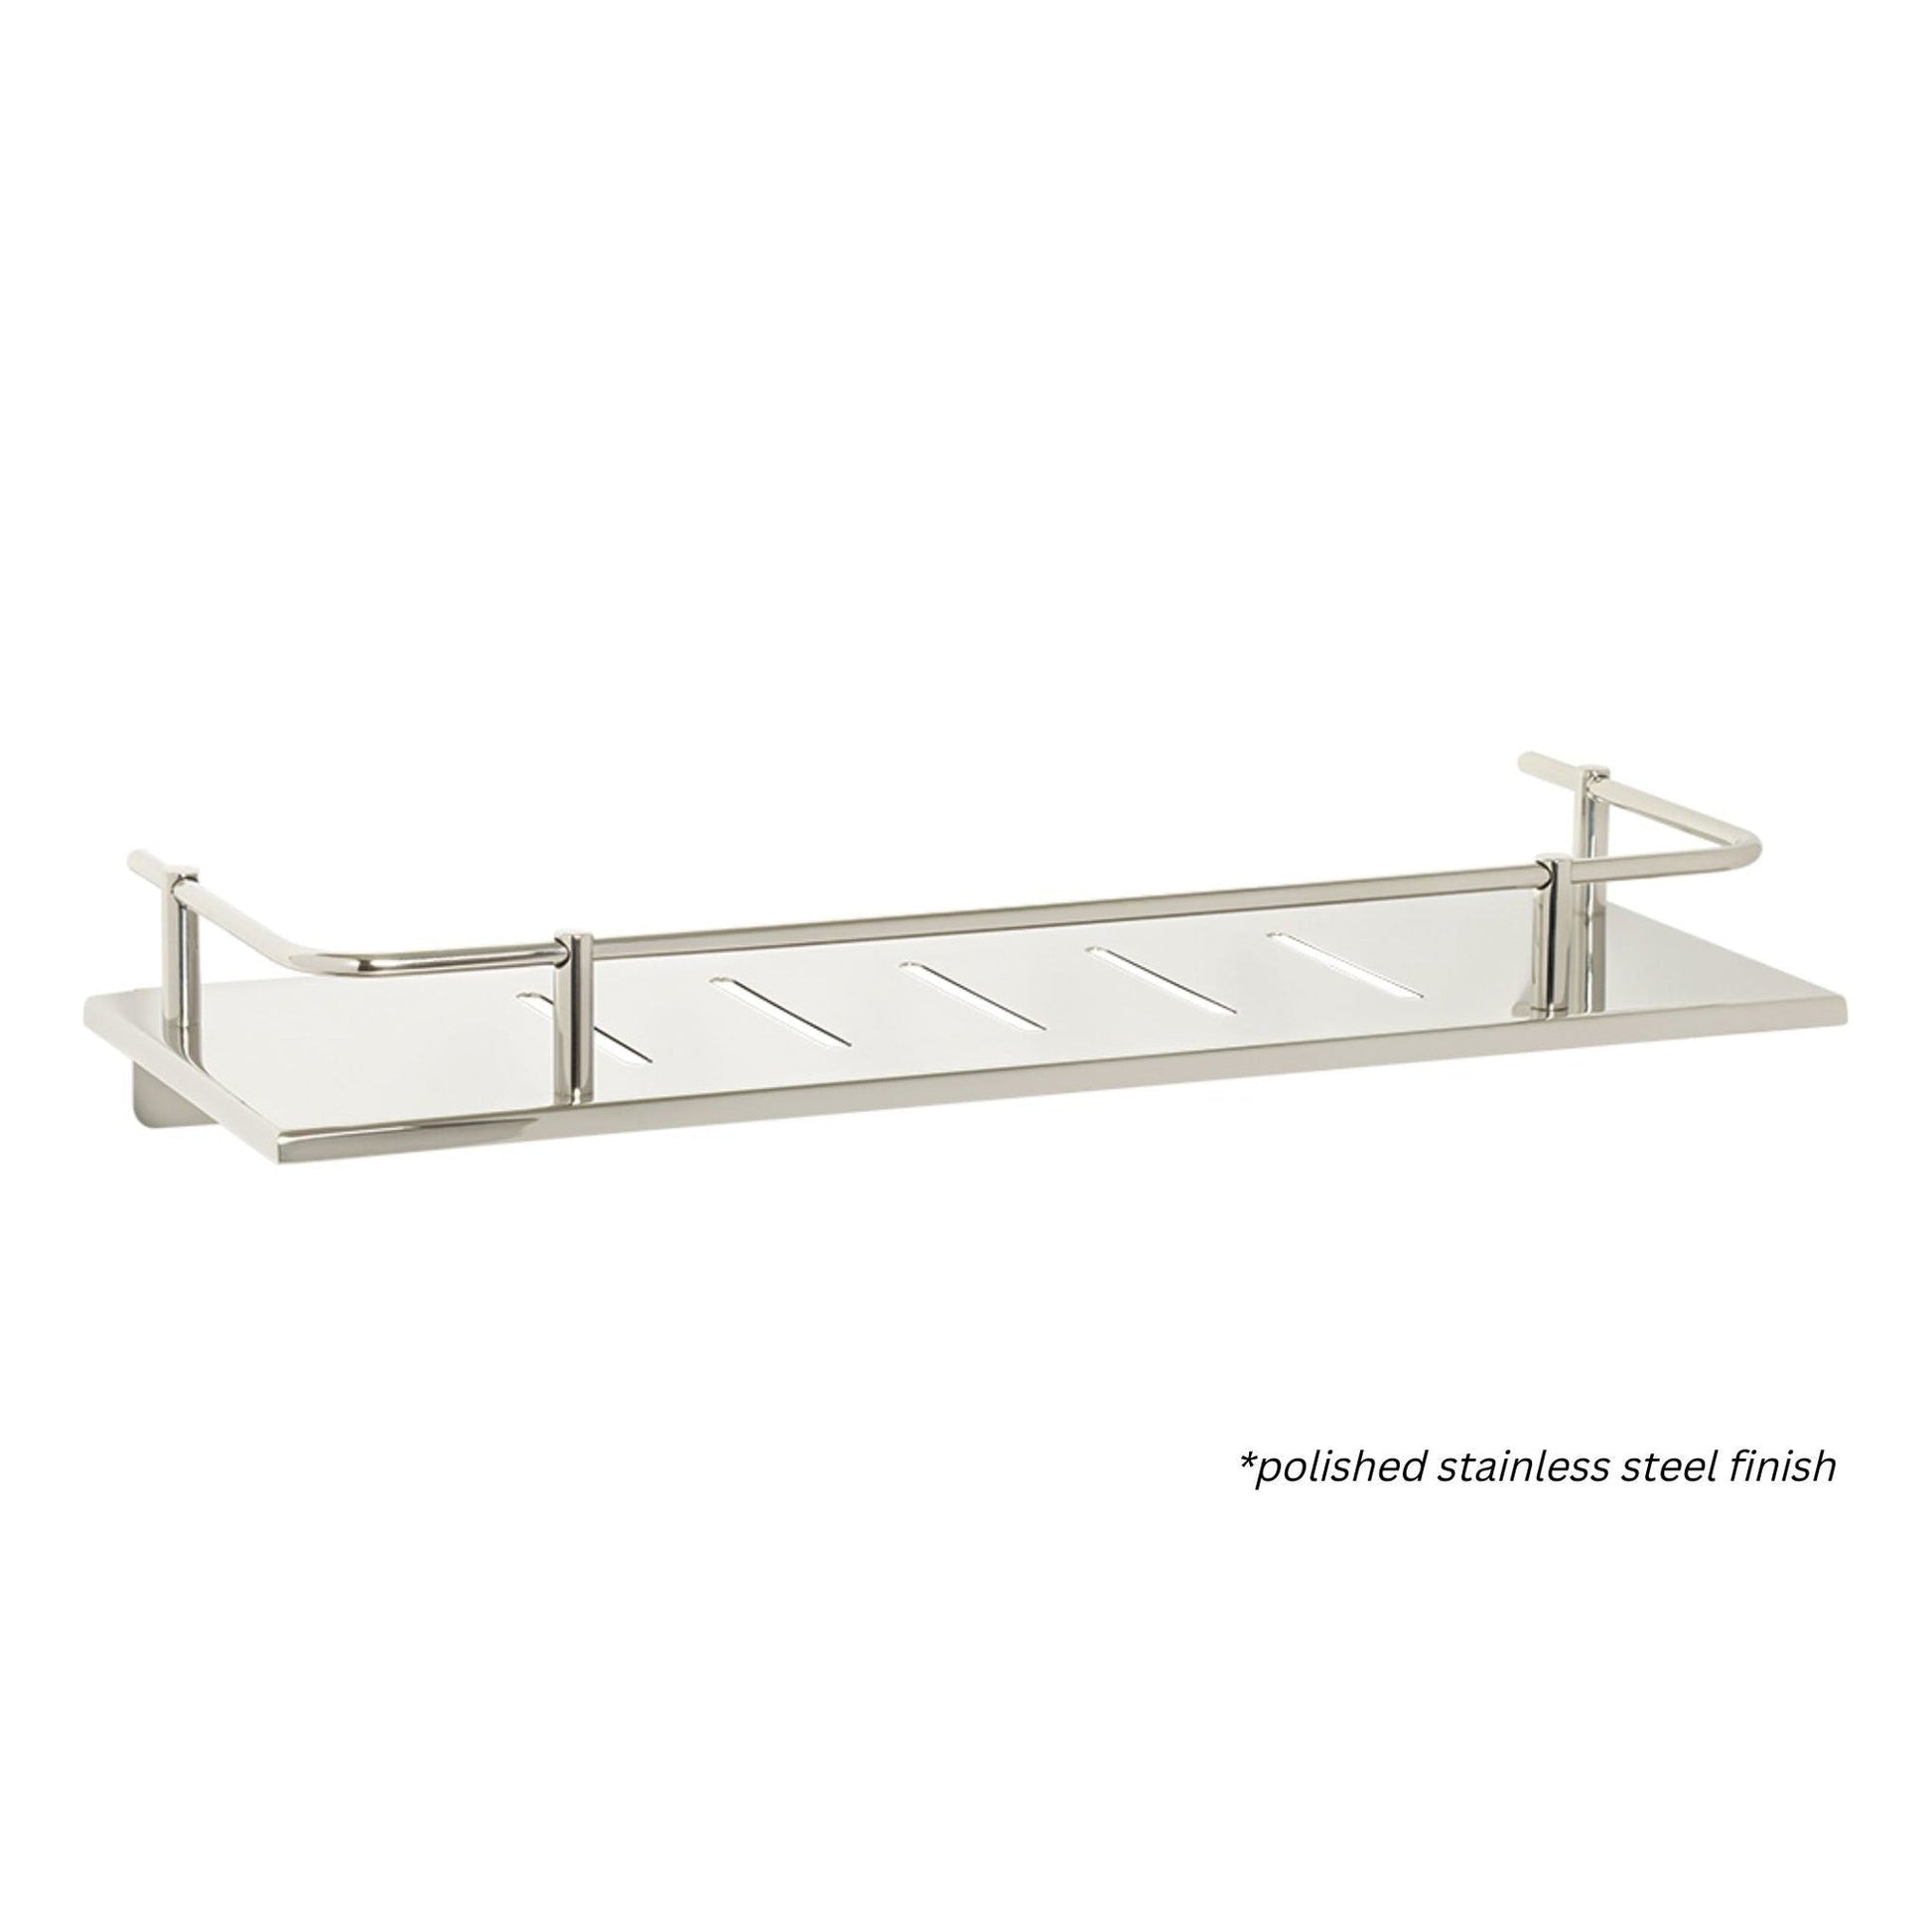 Seachrome Lifestyle and Wellness 720 Series 16" x 6" Rectangular Sundries Shower Shelf With Rail in Matte Black Powder Coated Stainless Finish